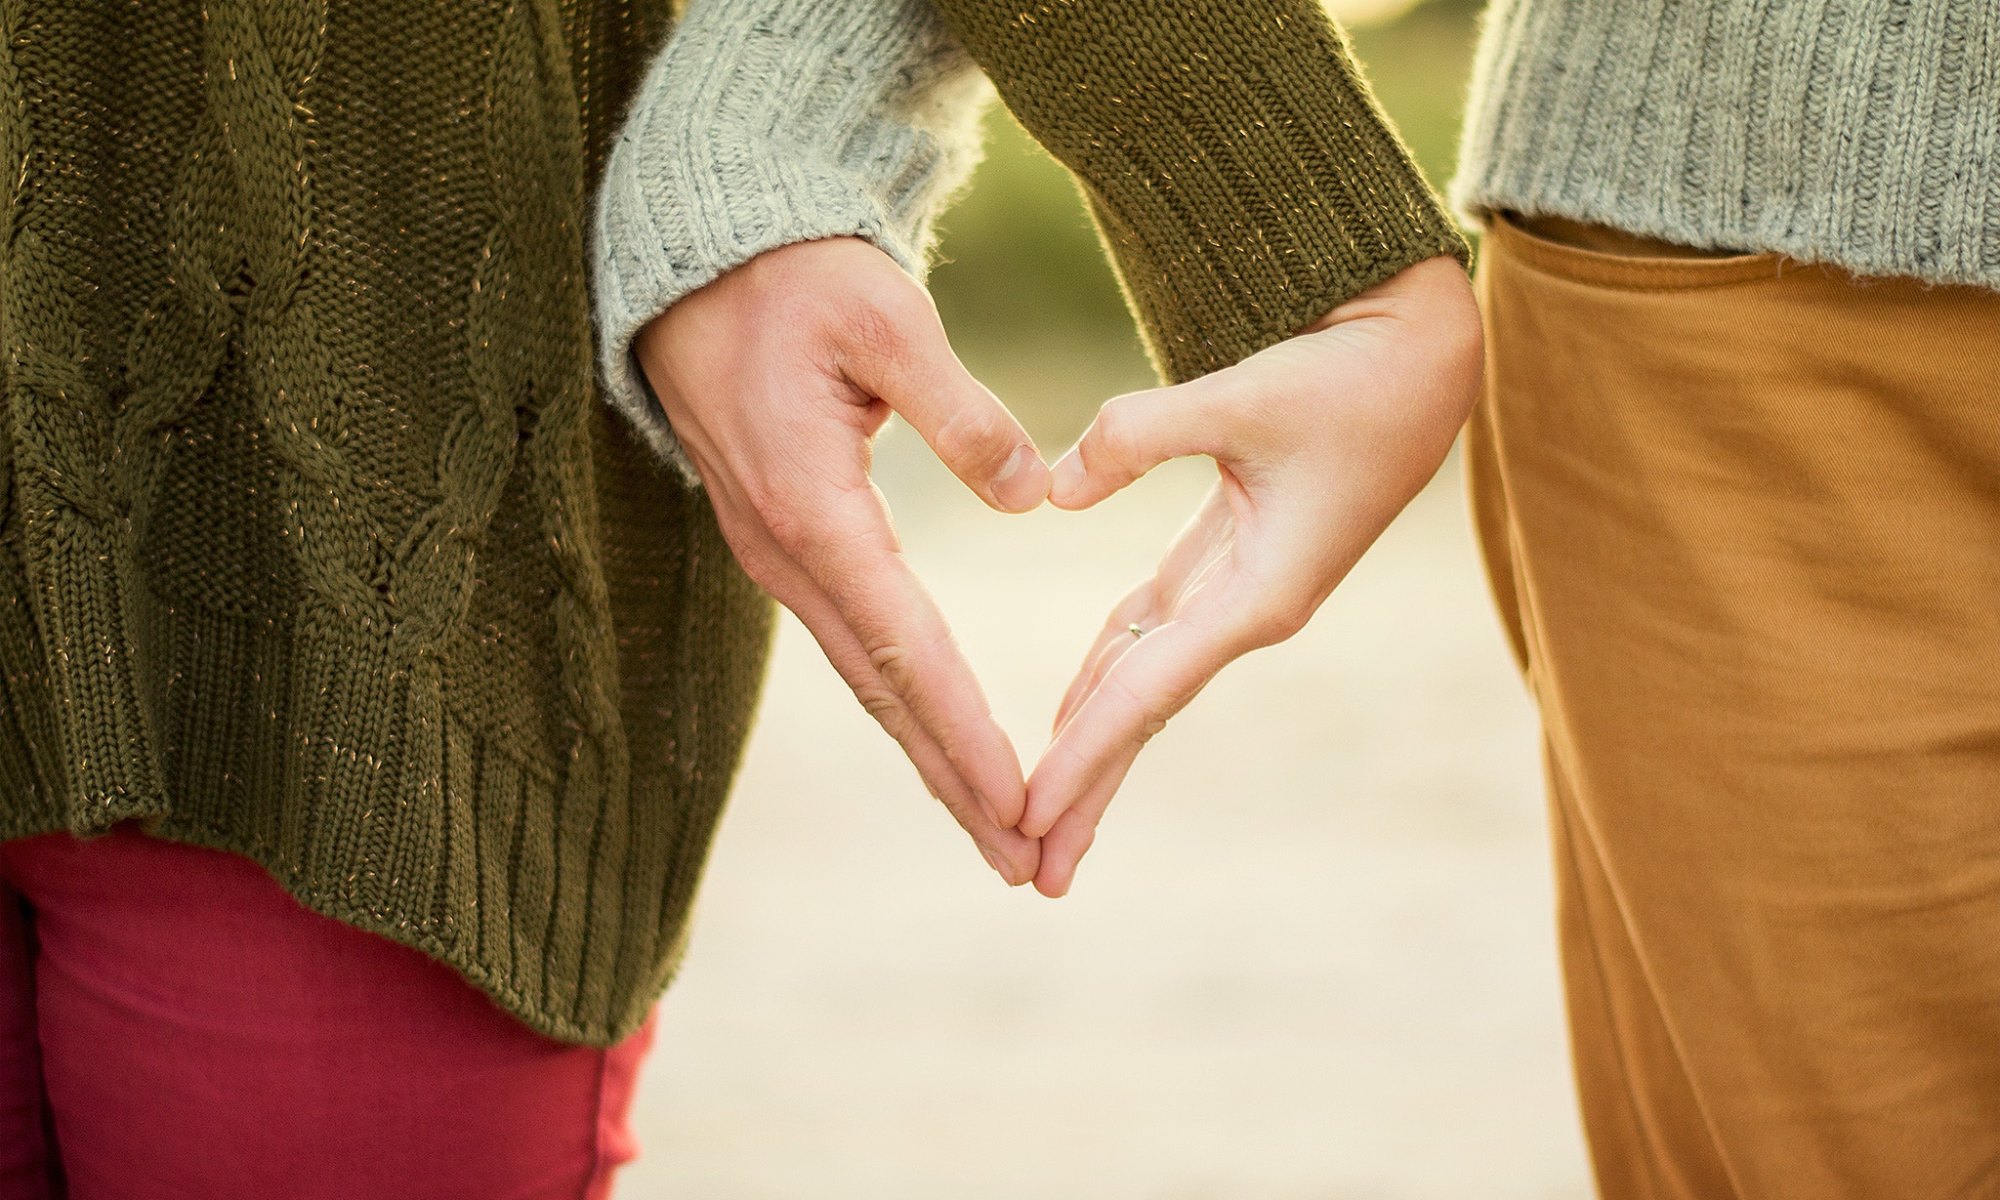 Two people being tender-hearted and forming a heart shape with their hands